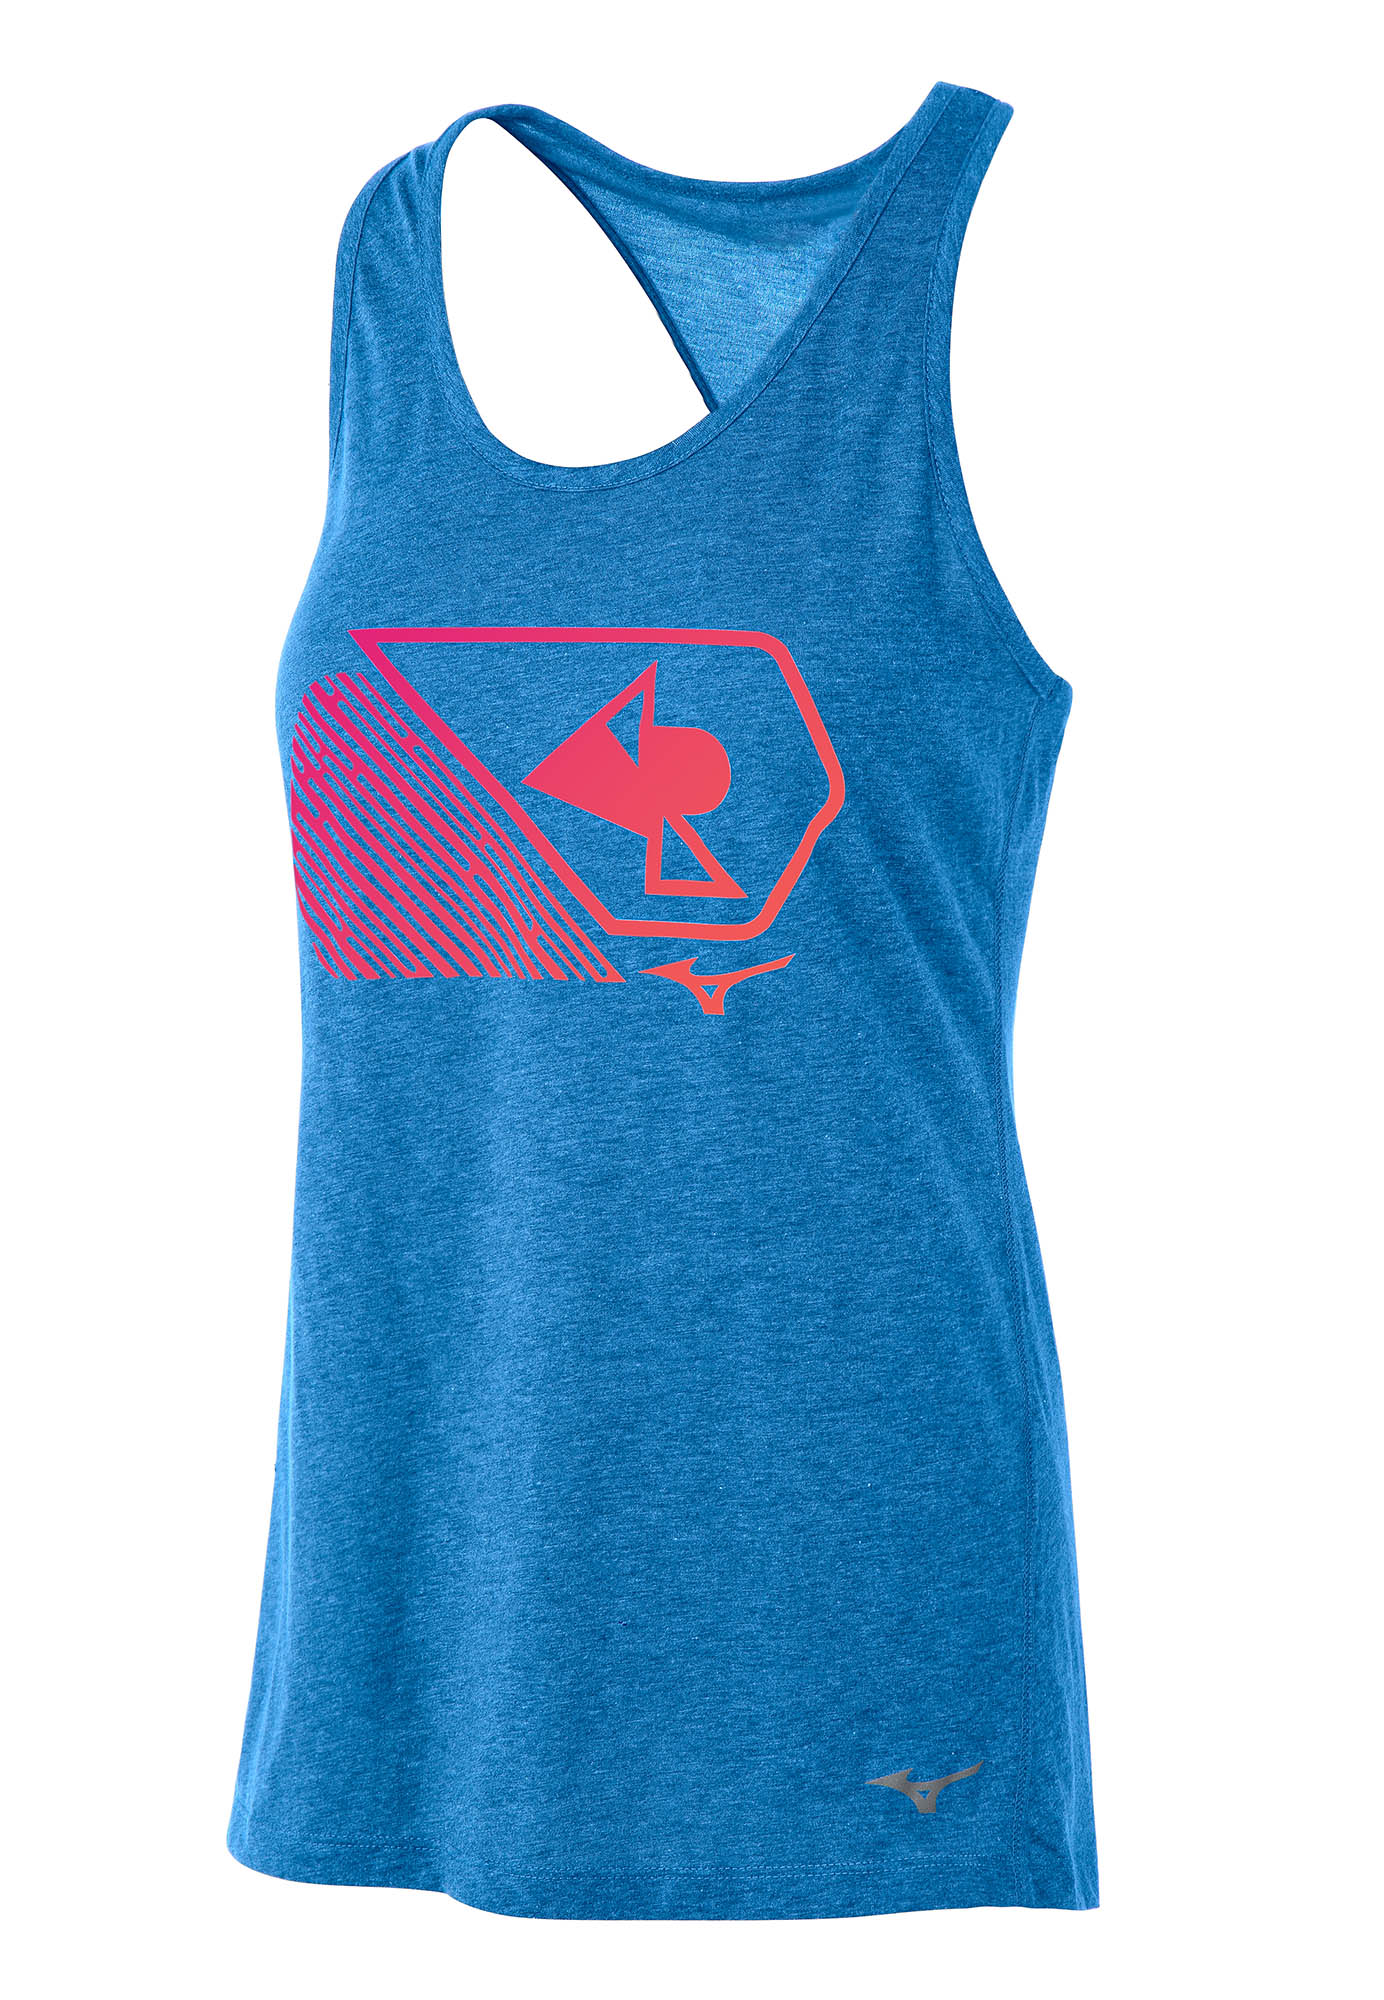 Ghost Mannequin photograph of Mizuno women's teal volleyball cotton tank